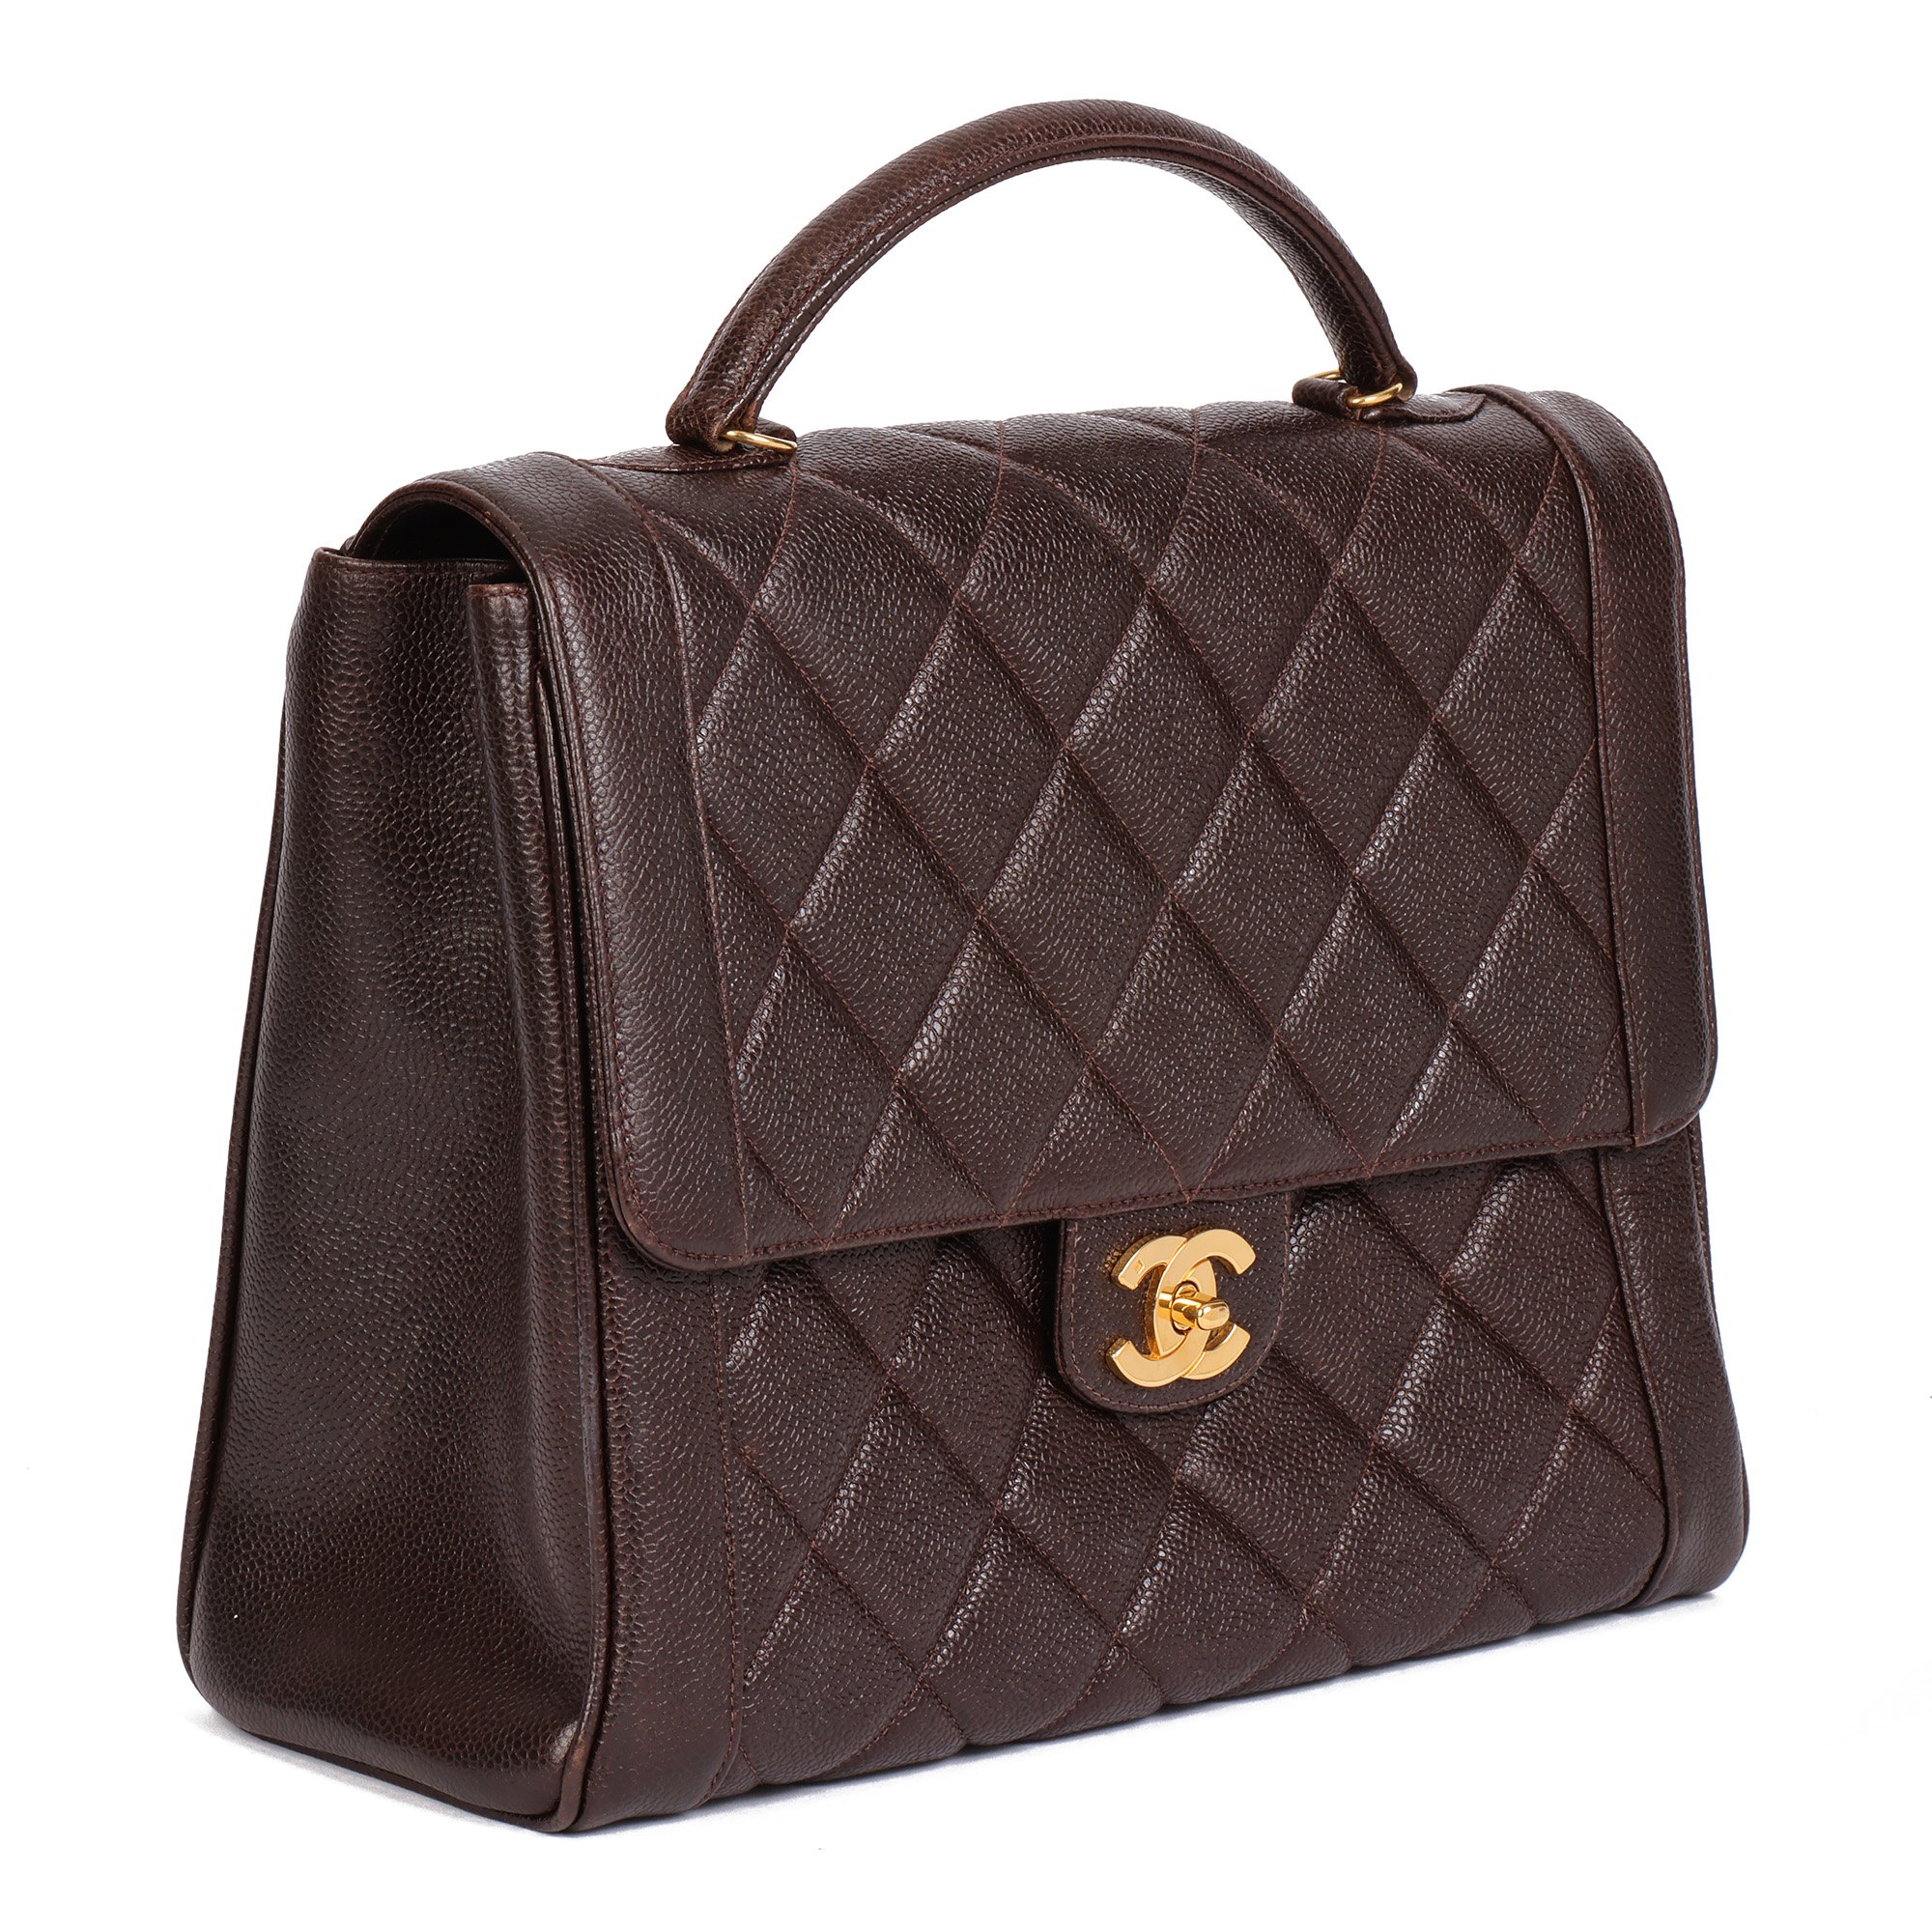 Chanel Chocolate Brown Quilted Caviar Leather Vintage Classic Kelly